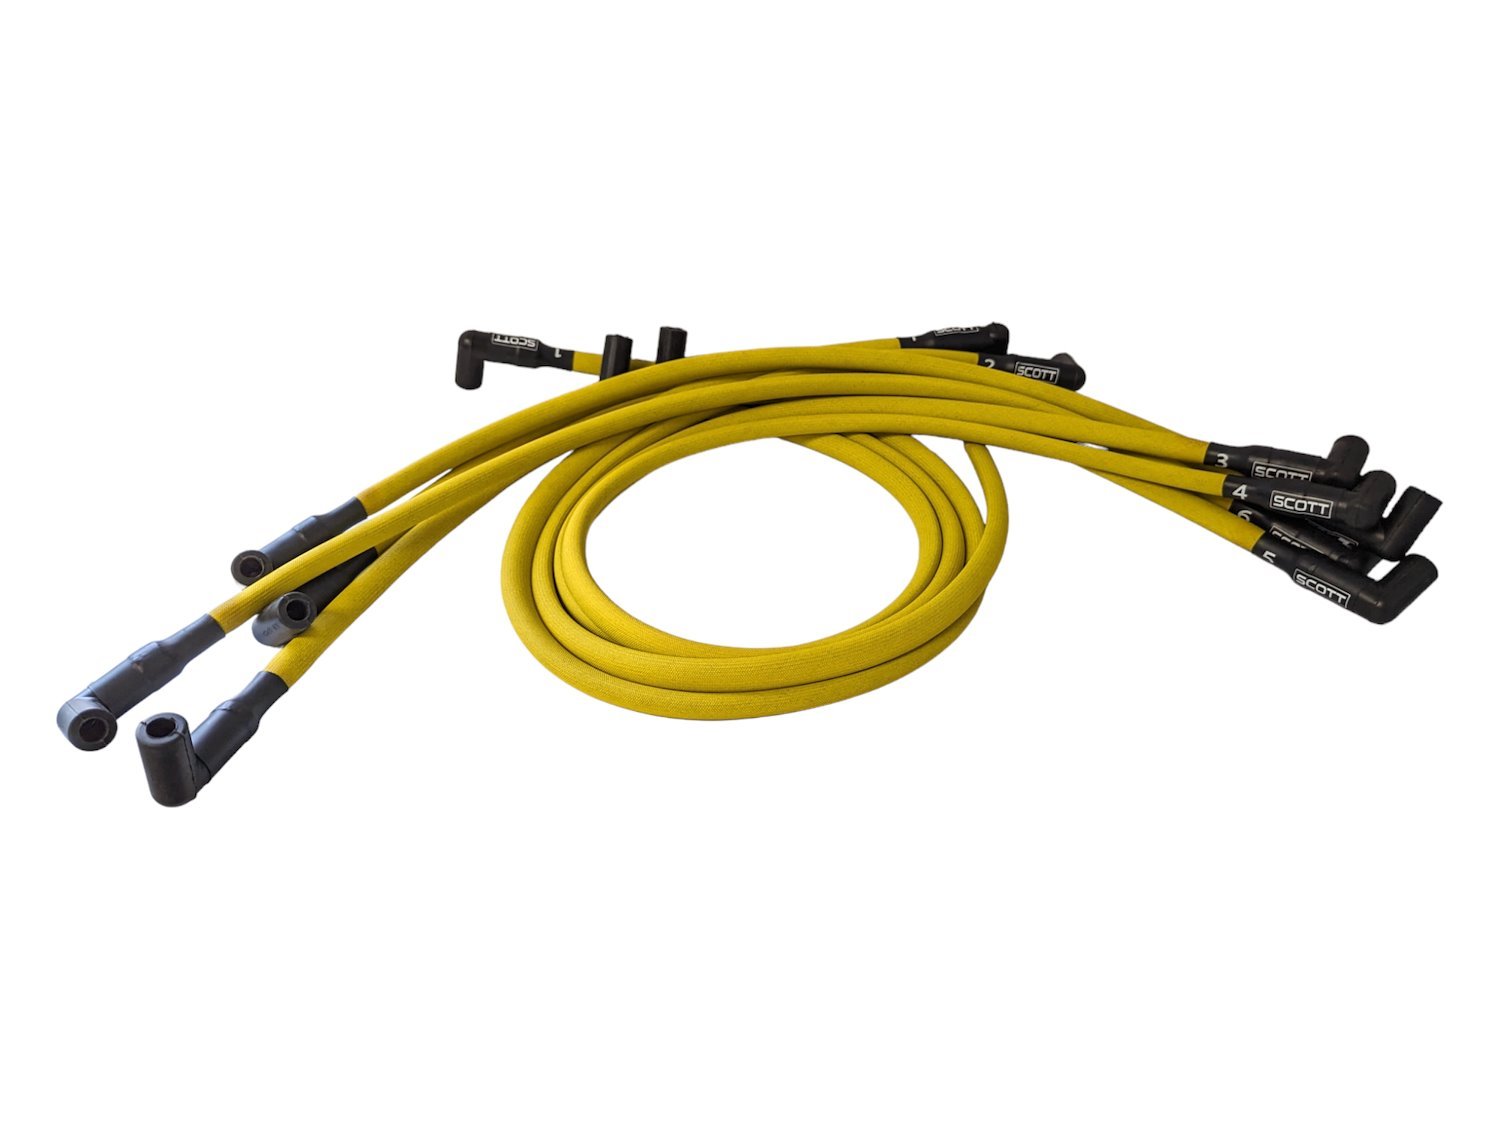 SPW-PS-416-5 High-Performance Fiberglass-Oversleeved Spark Plug Wire Set for Big Block Chevy, Under Header [Yellow]